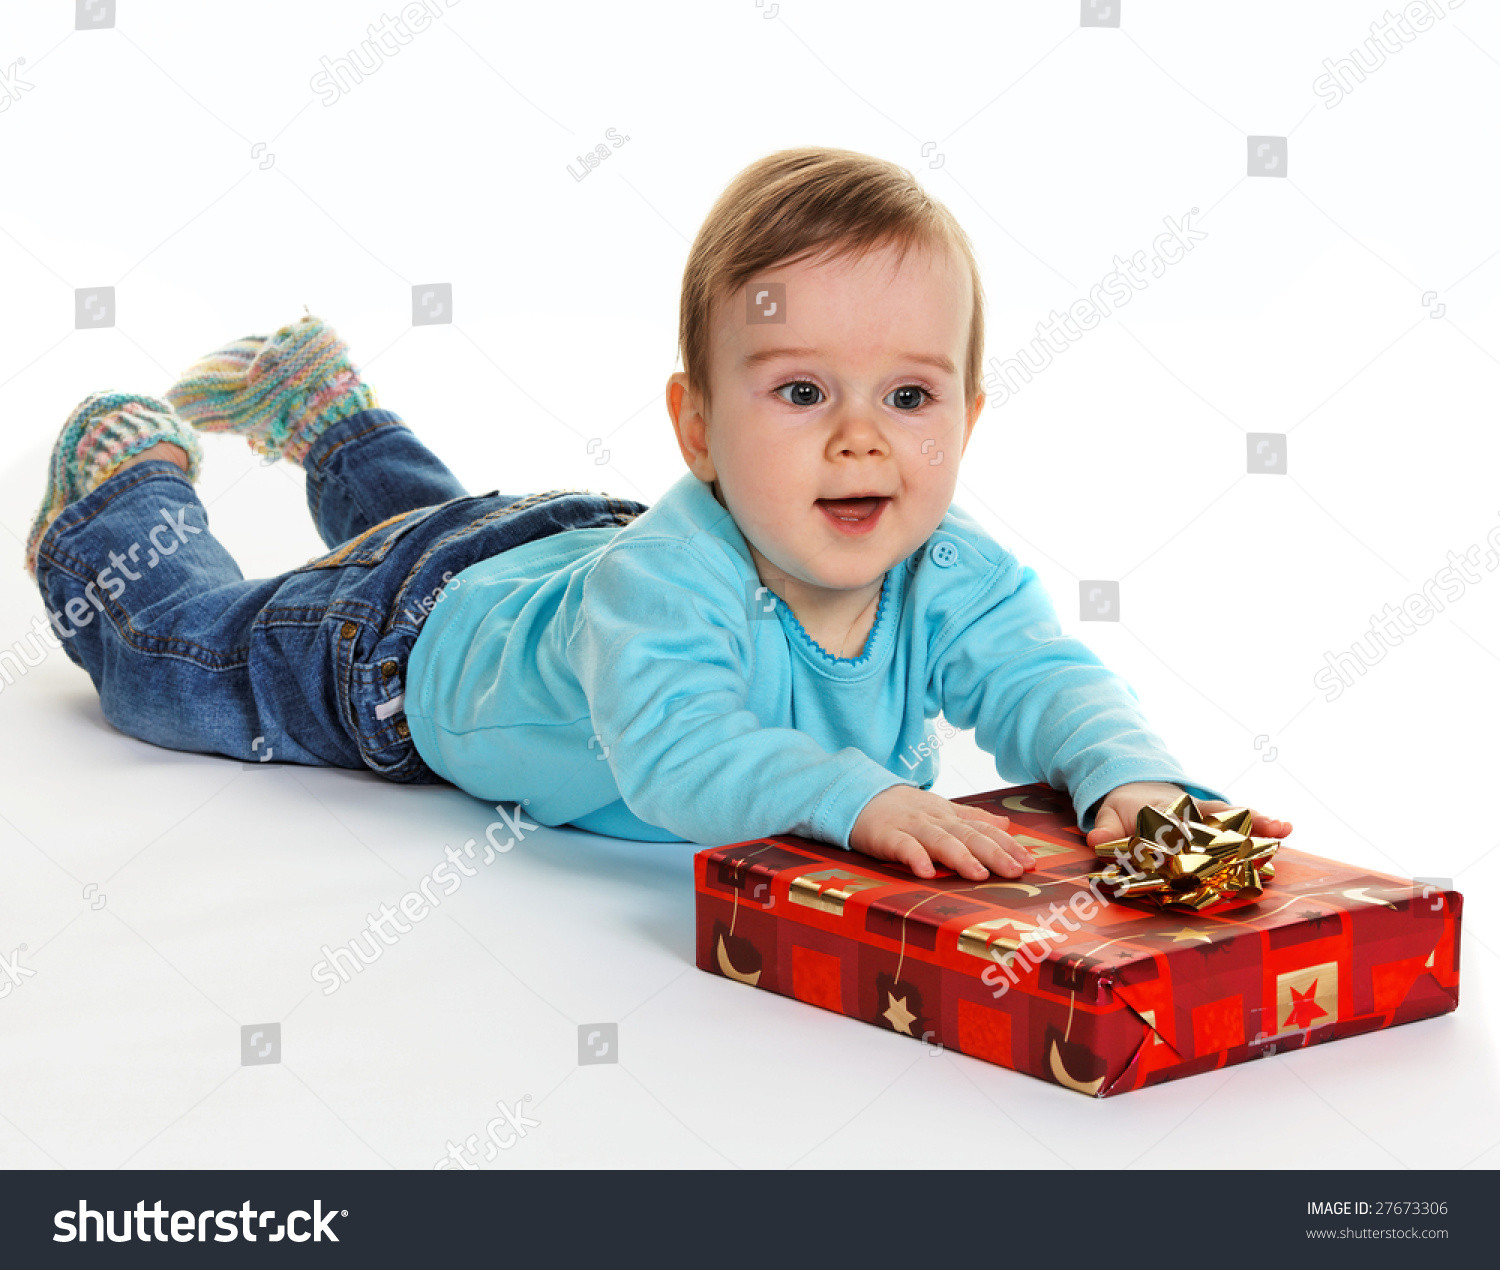 Small Gift For Child
 Small Child With A Baby Gift Package For Christmas Stock